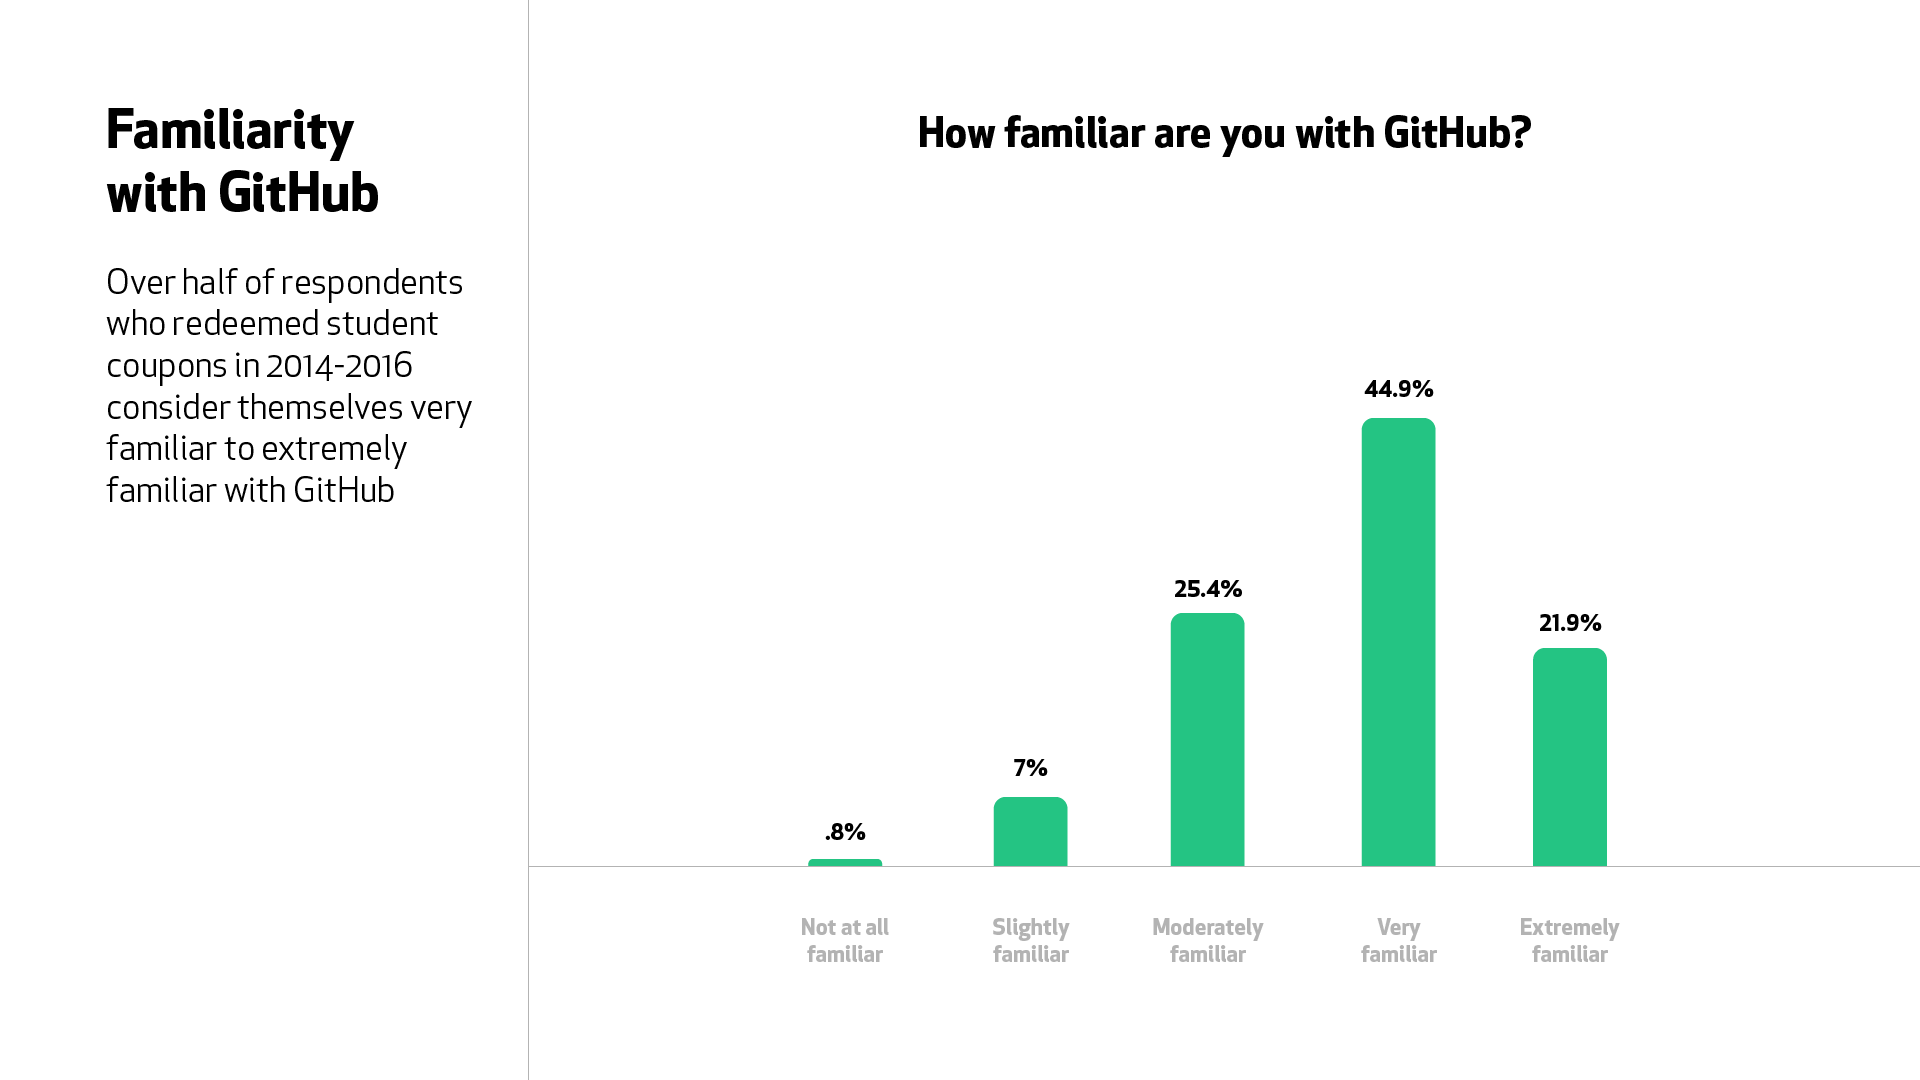 A graph for the question, “How familiar are you with GitHub?” Over half of respondents consider themselves “very familiar” (44.9%) to “extremely familiar” (21.9%).